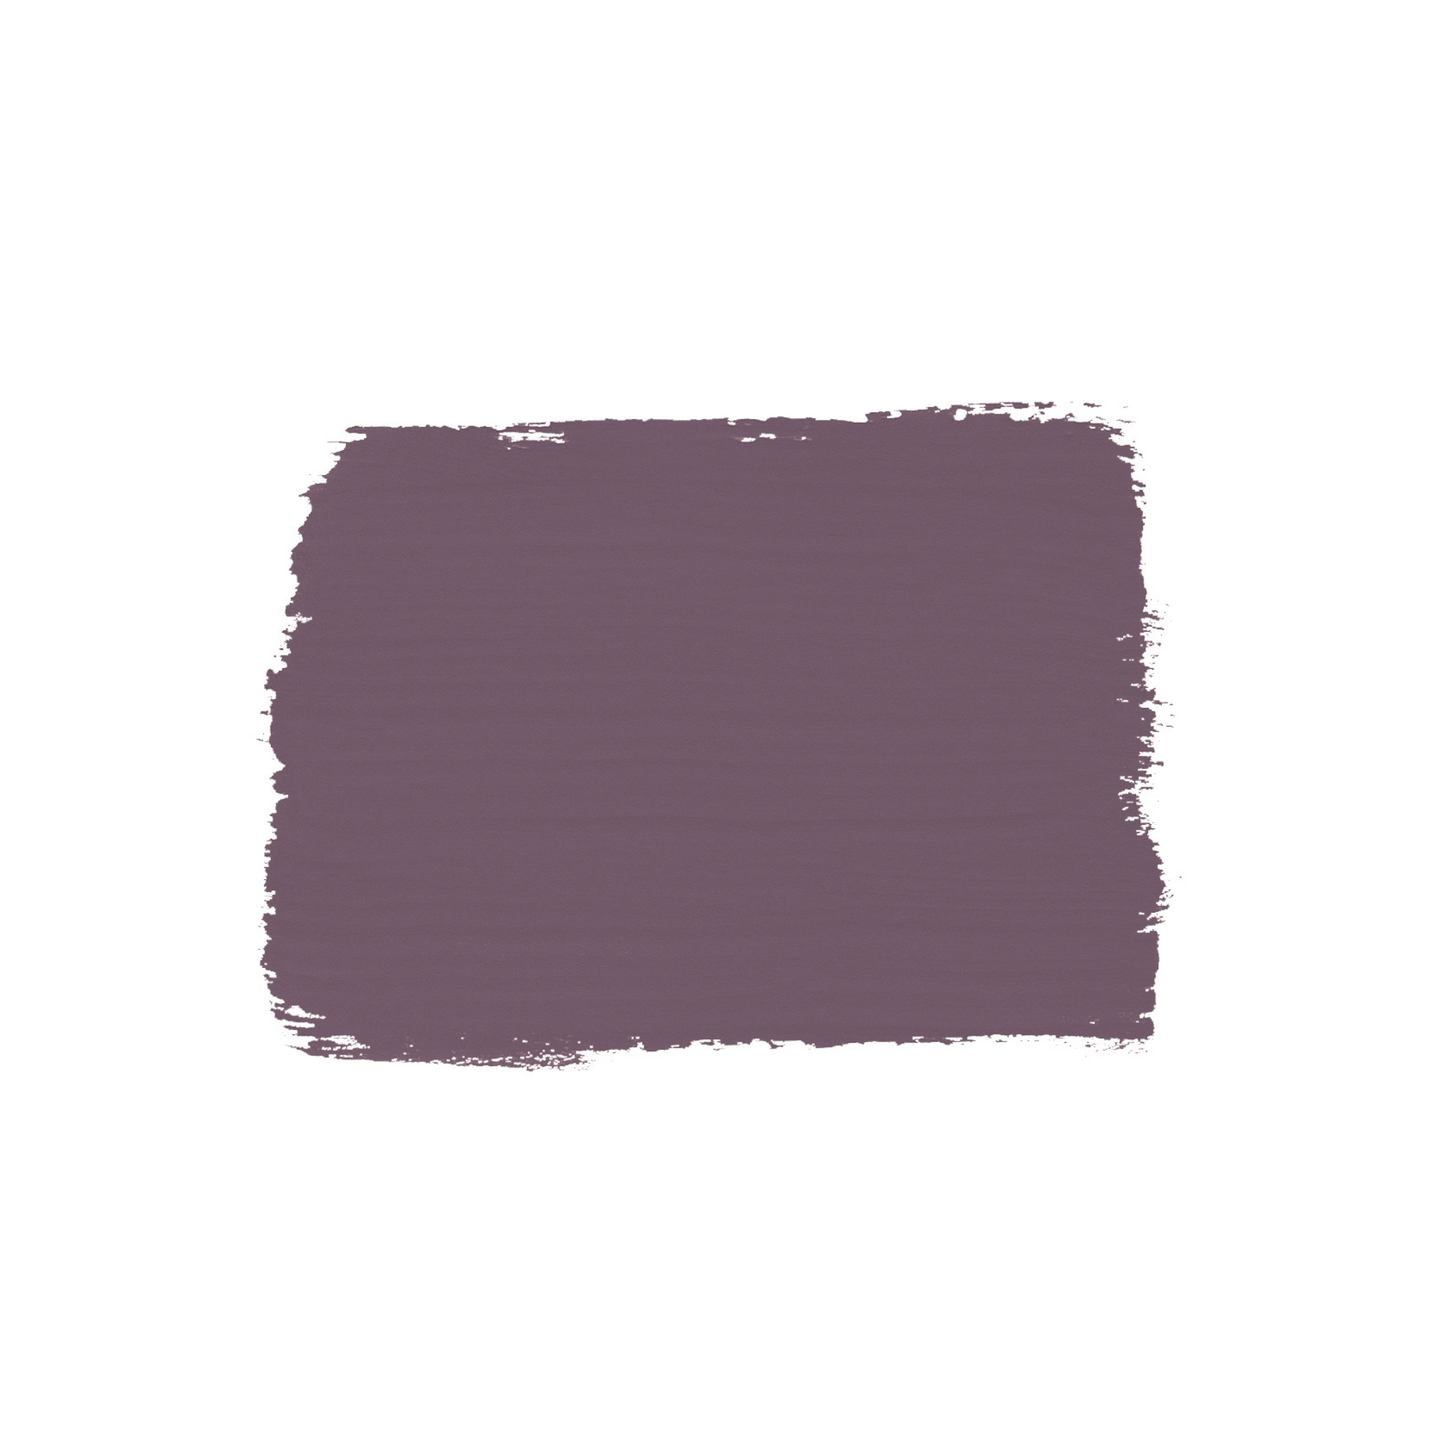 Swatch of Rodmell Annie Sloan Chalk Paint.